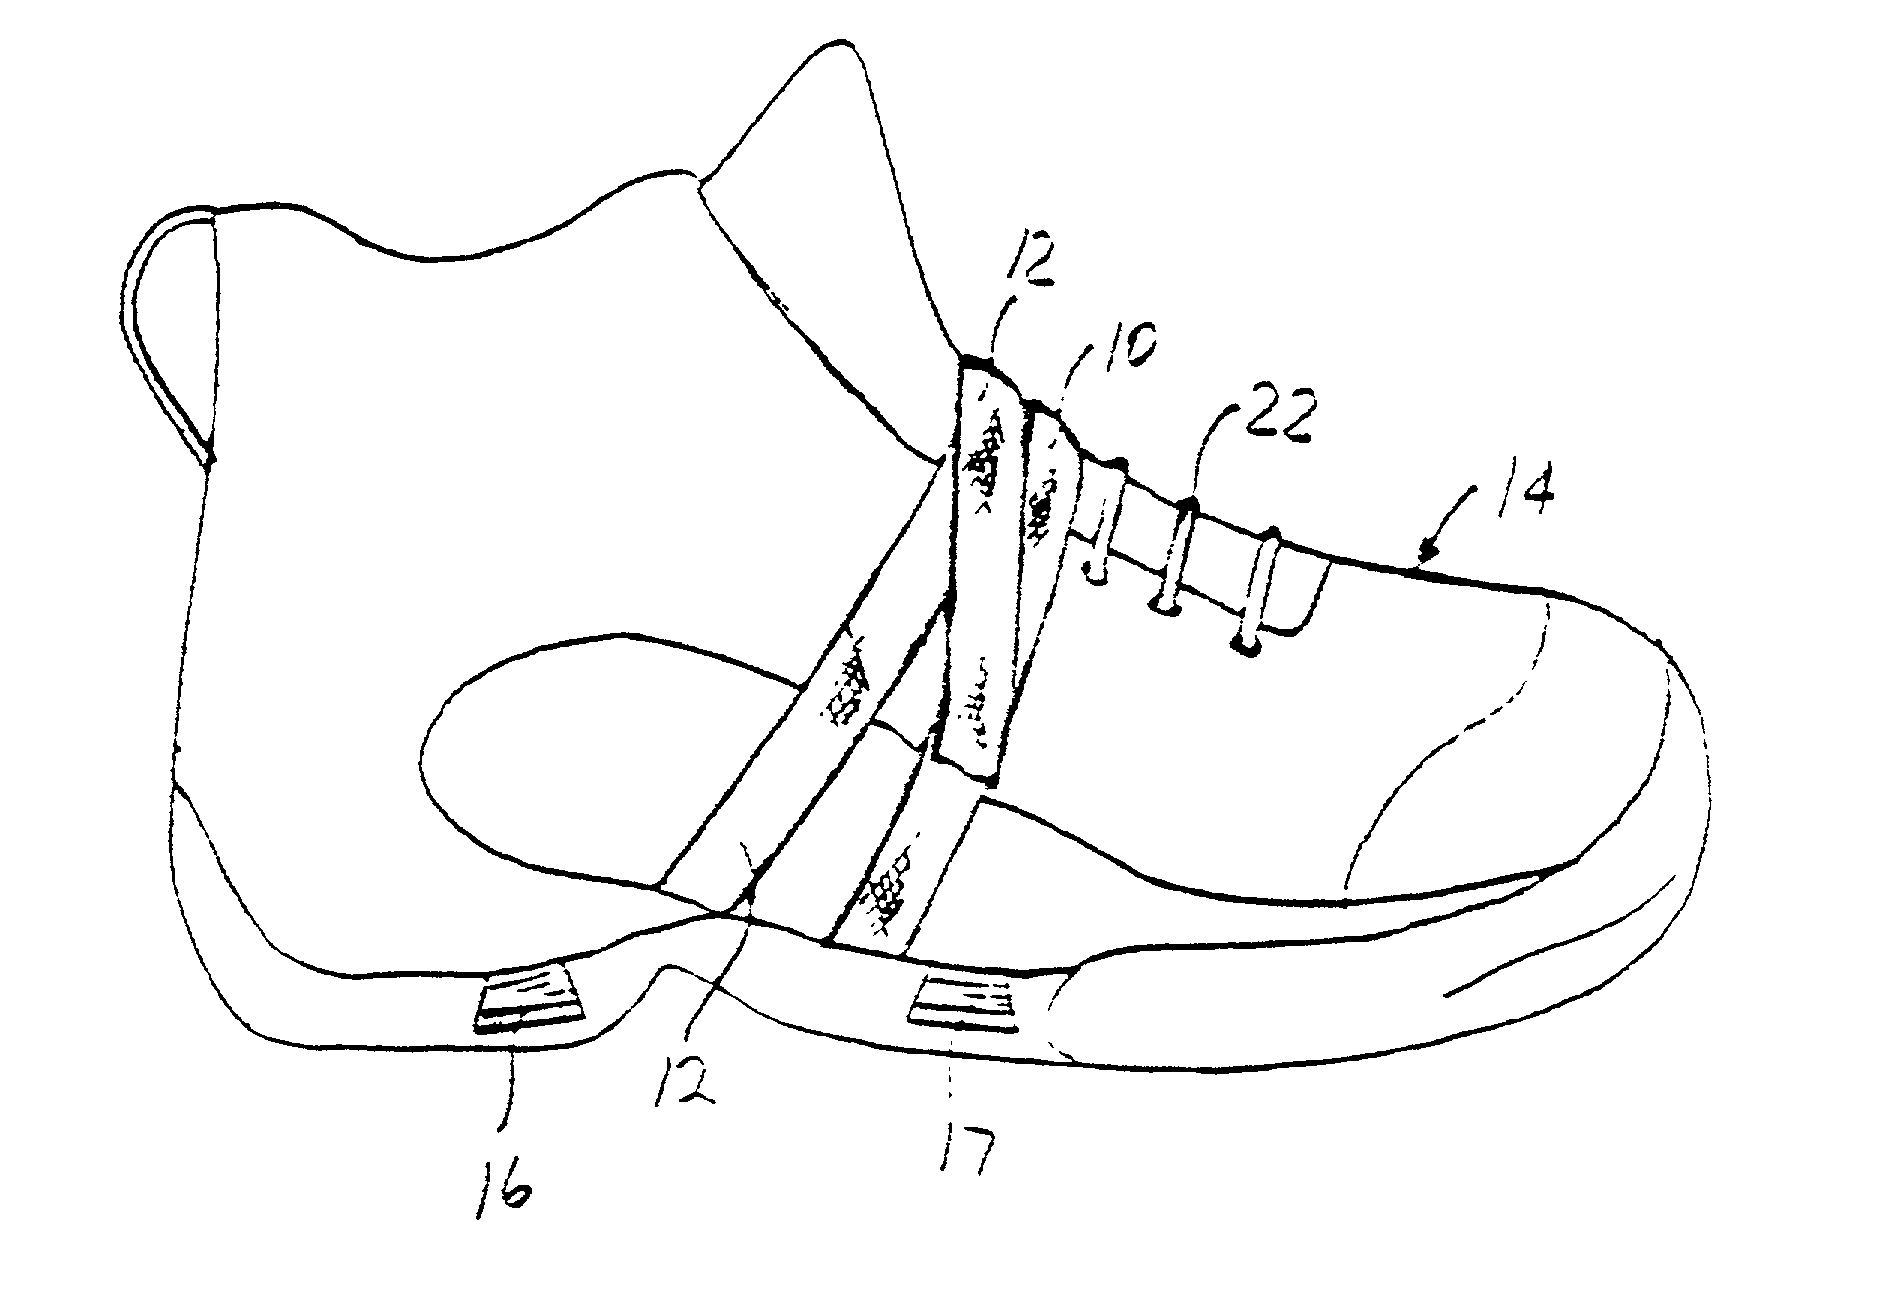 Athletic shoe or sneaker with stabilization device